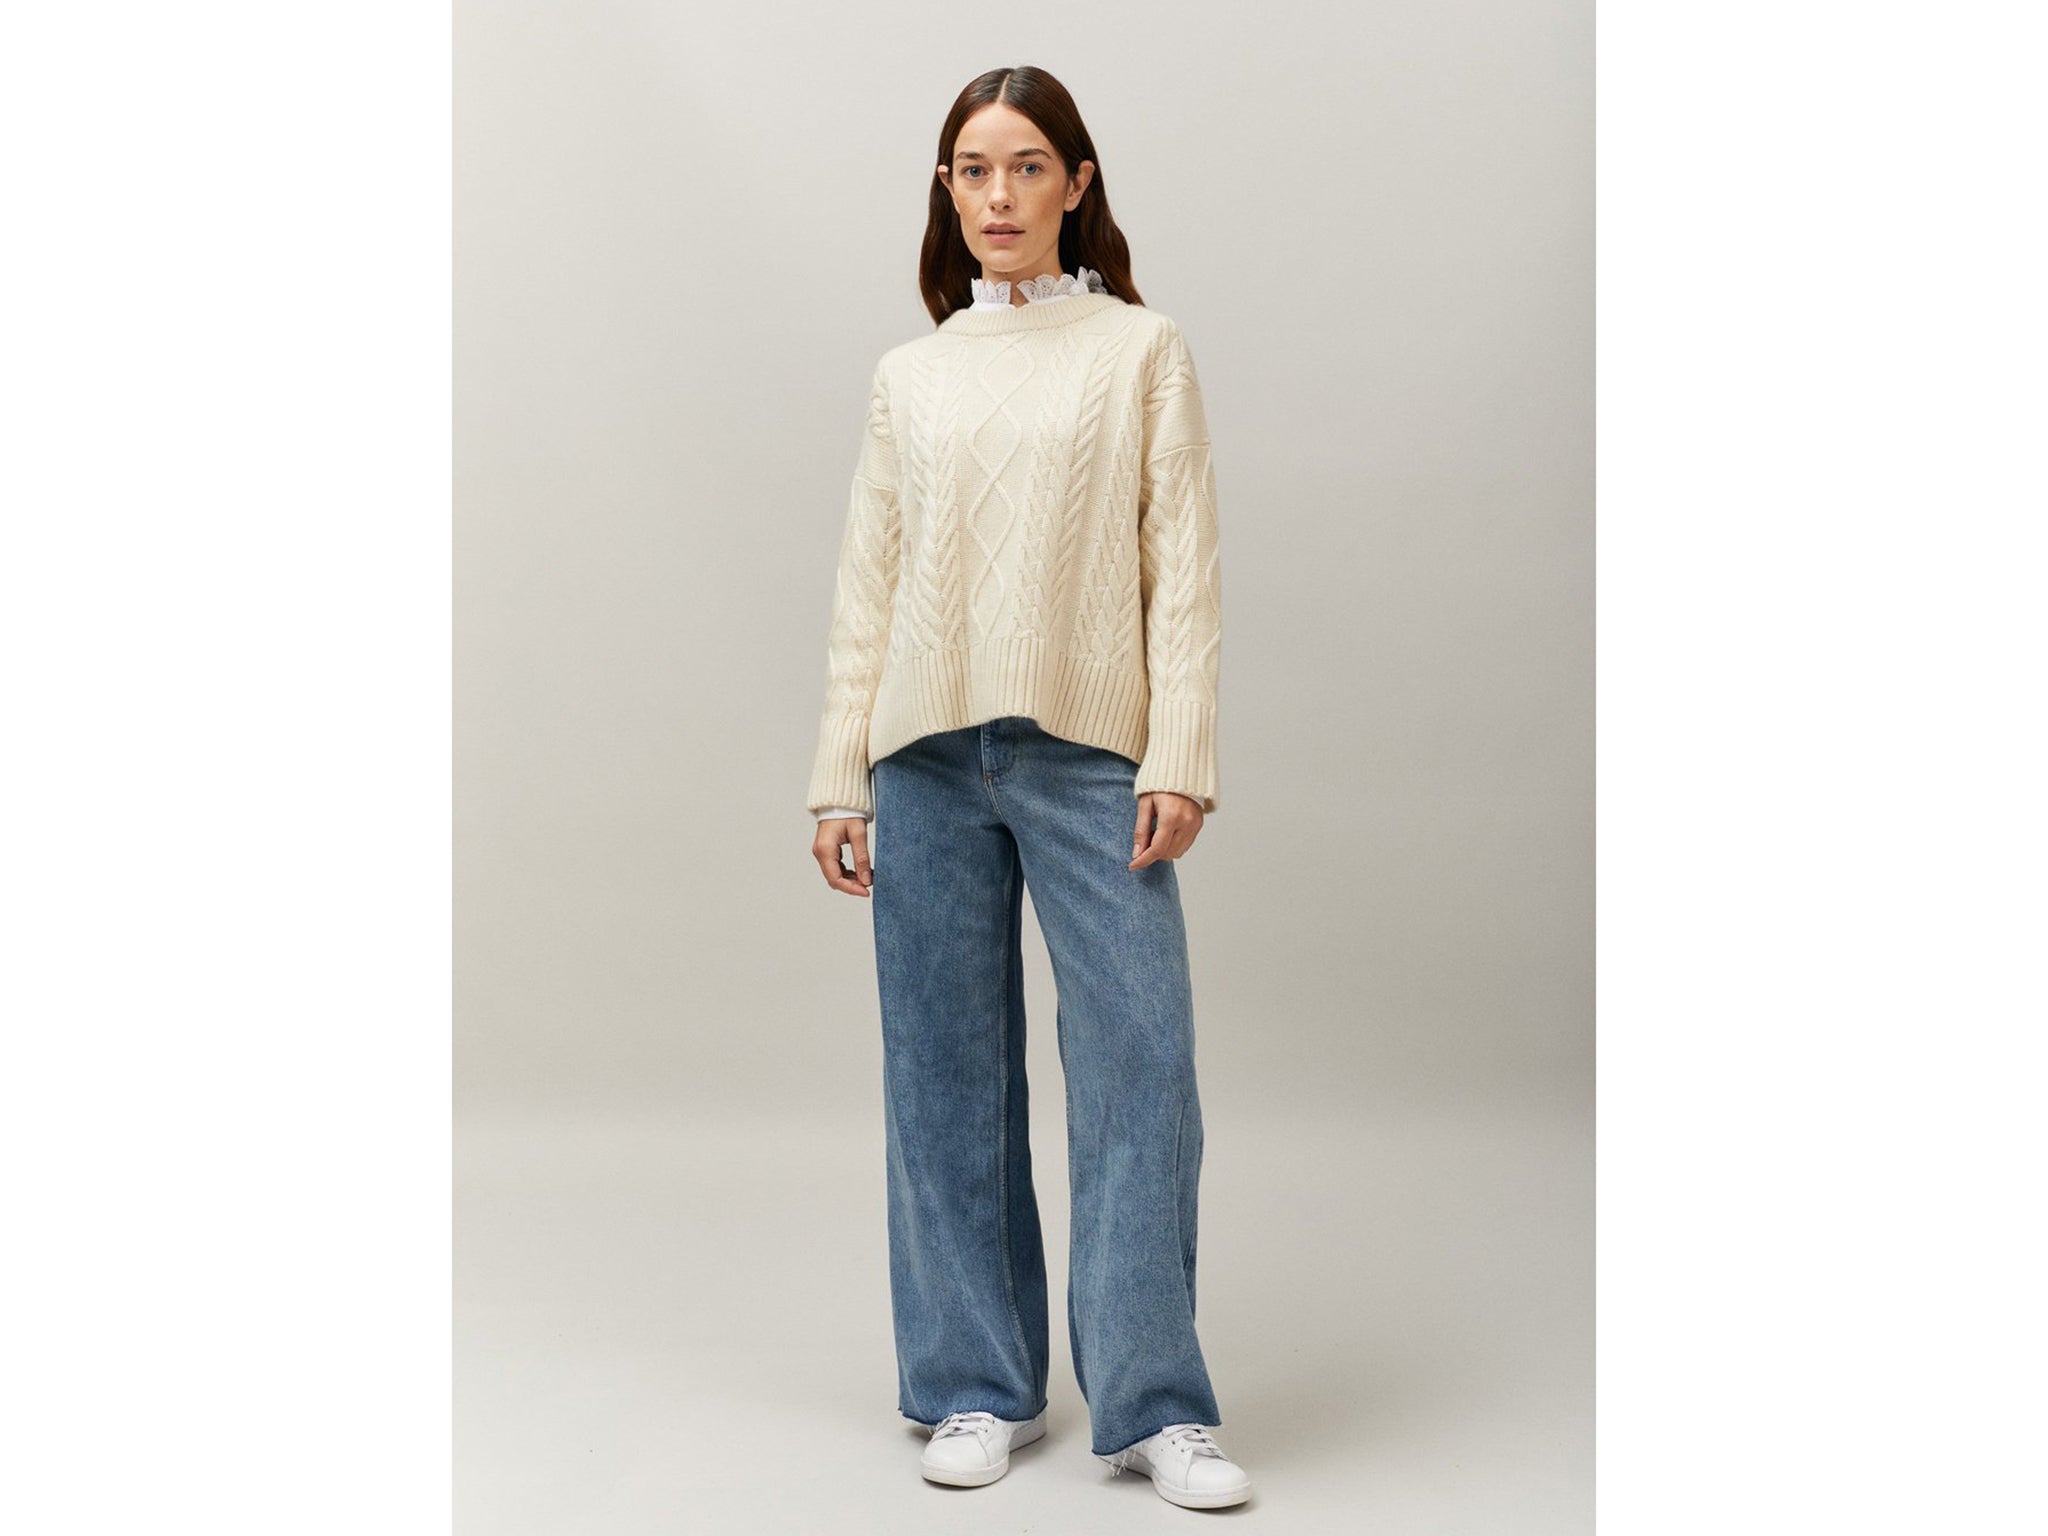 crumpet-cashmere-indybest-kpa-garment-cable-sweater-off-white-28487883915310_1000x.jpeg